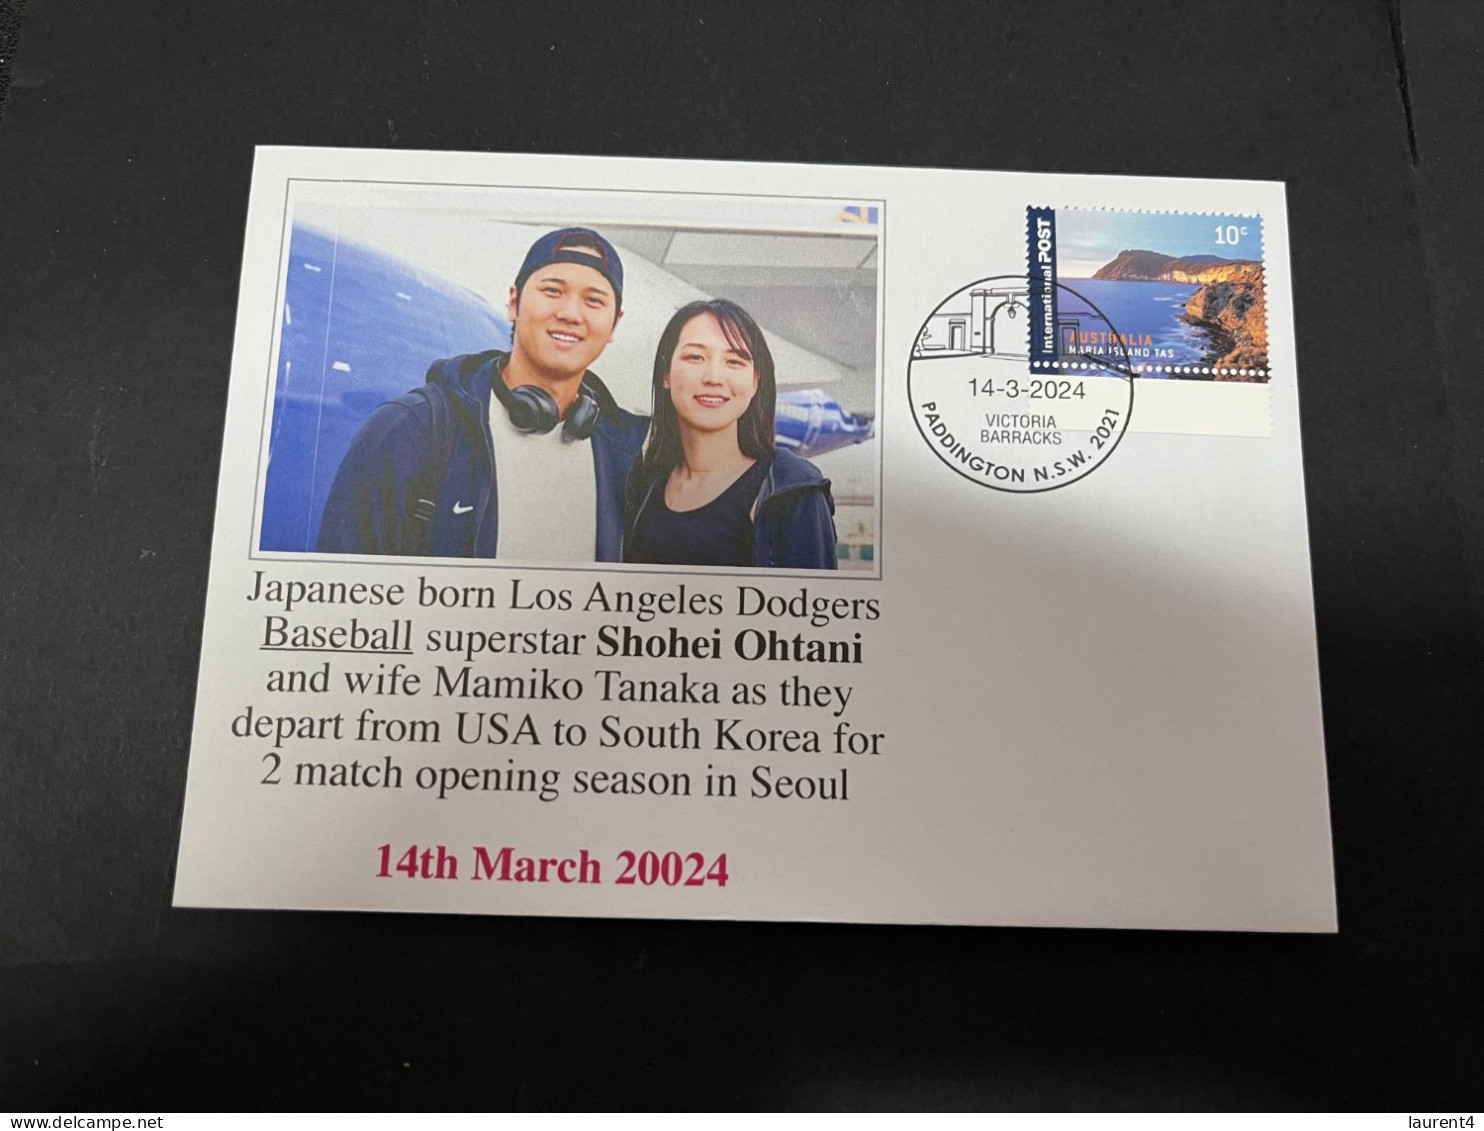 17-3-2024 (3 Y 17) Japanese Born Los Angeles Dodgers Baseball Superstar Shohei Ohtany And Wife Fly To Seoul - Baseball